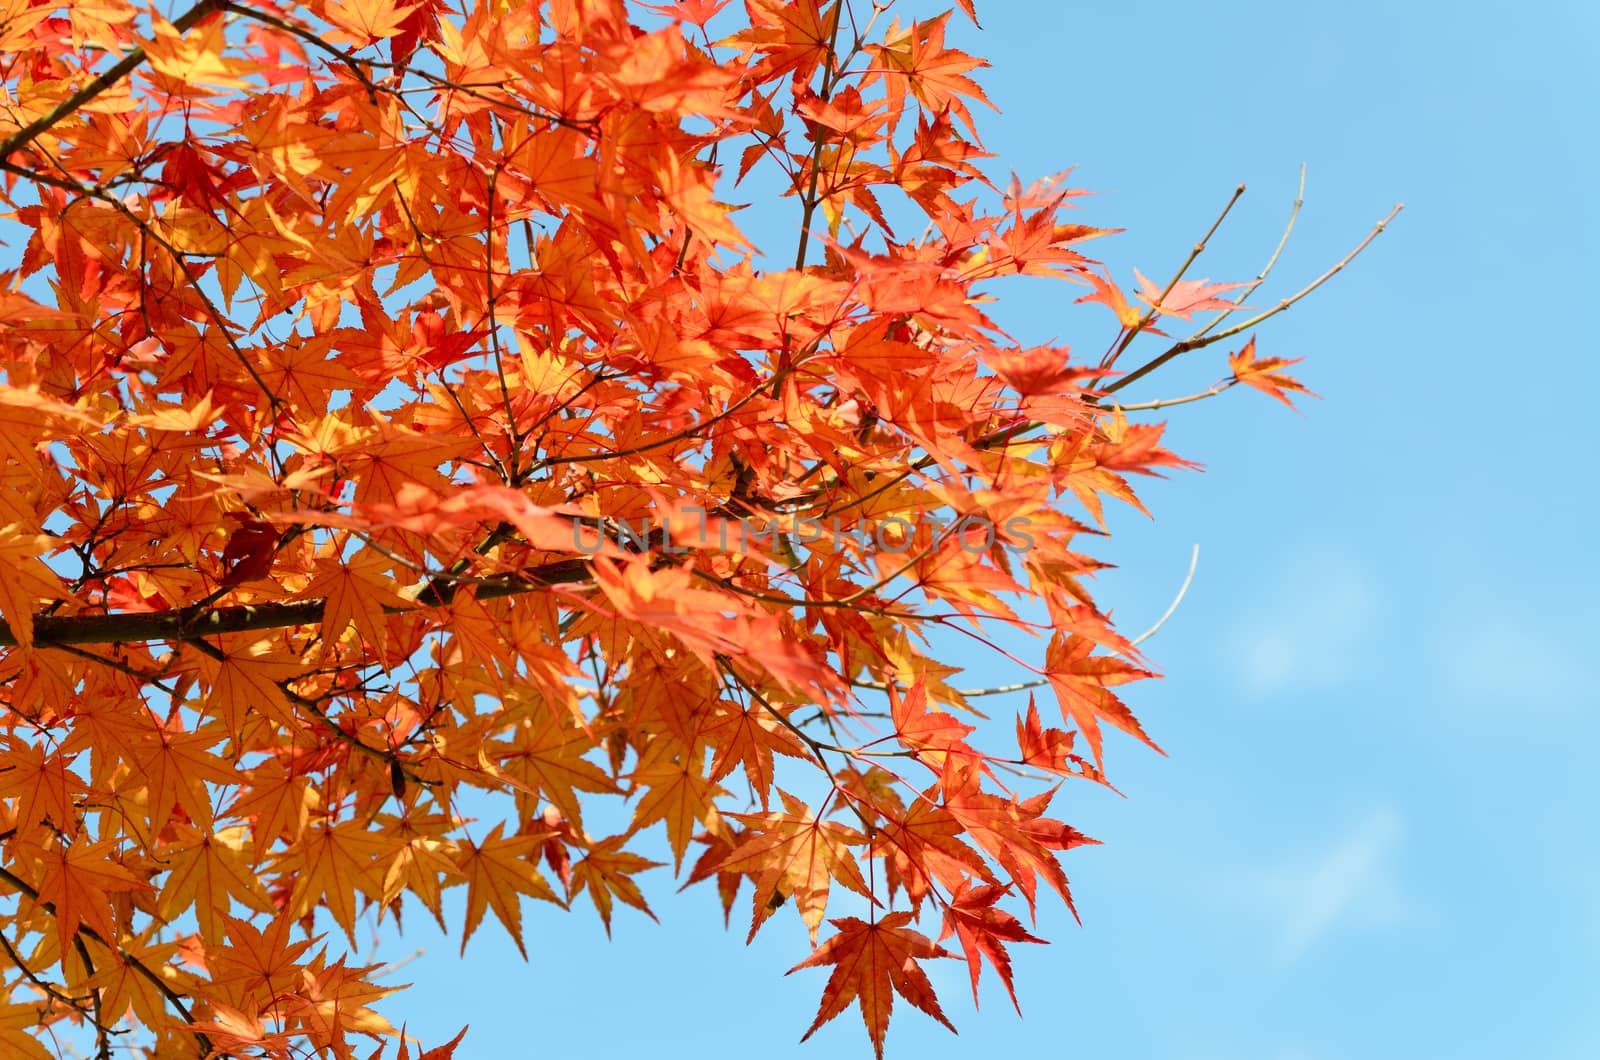 Red maple leaves in autumn against blue sky